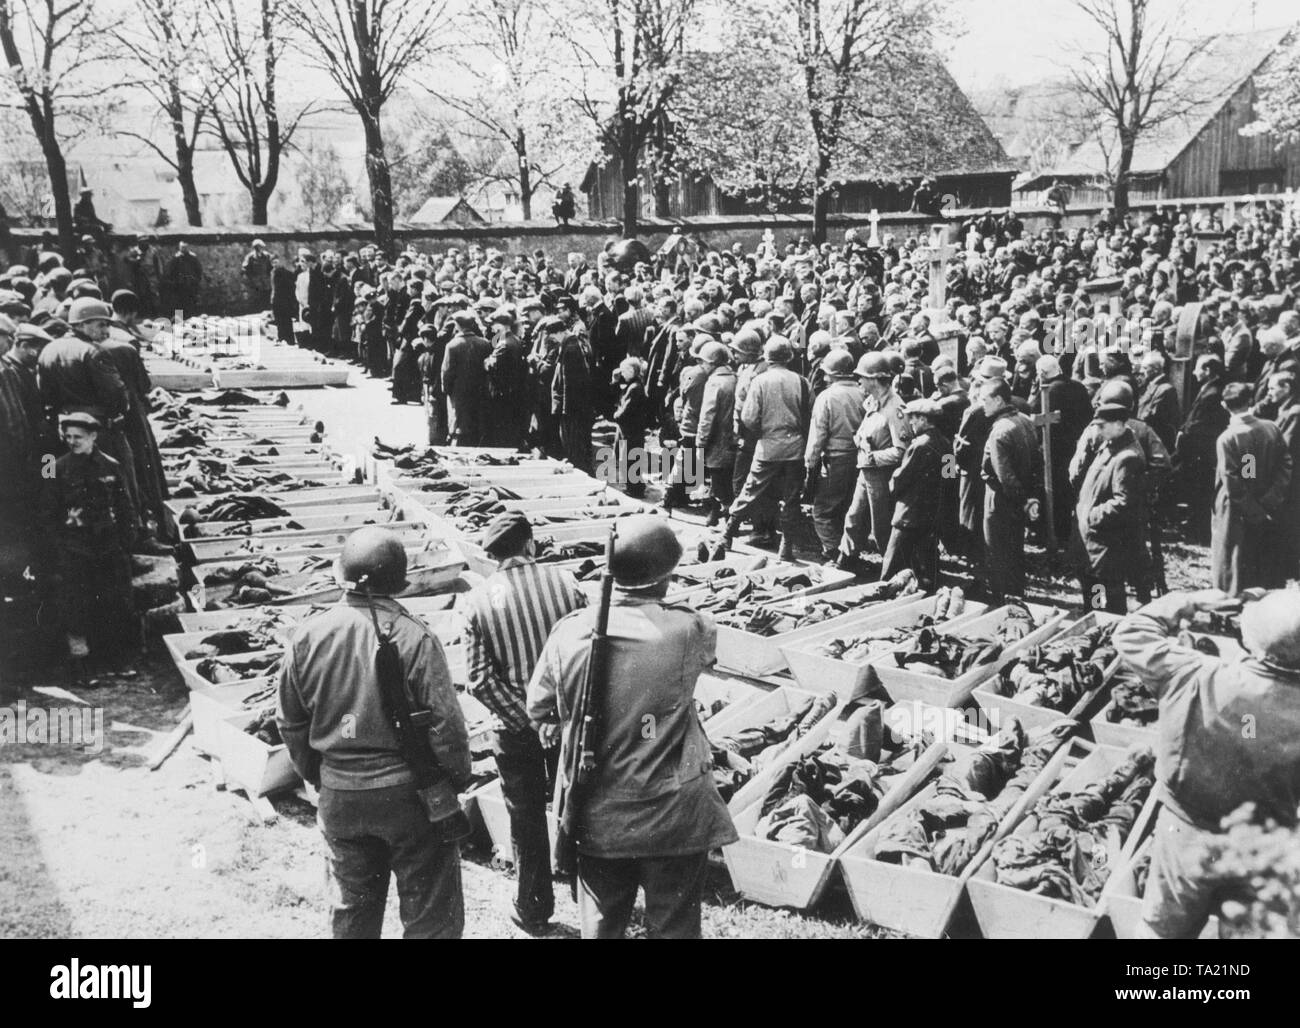 On the death march to the Dachau concentration camp, SS guards shot any inmate too sick to keep up, Stock Photo